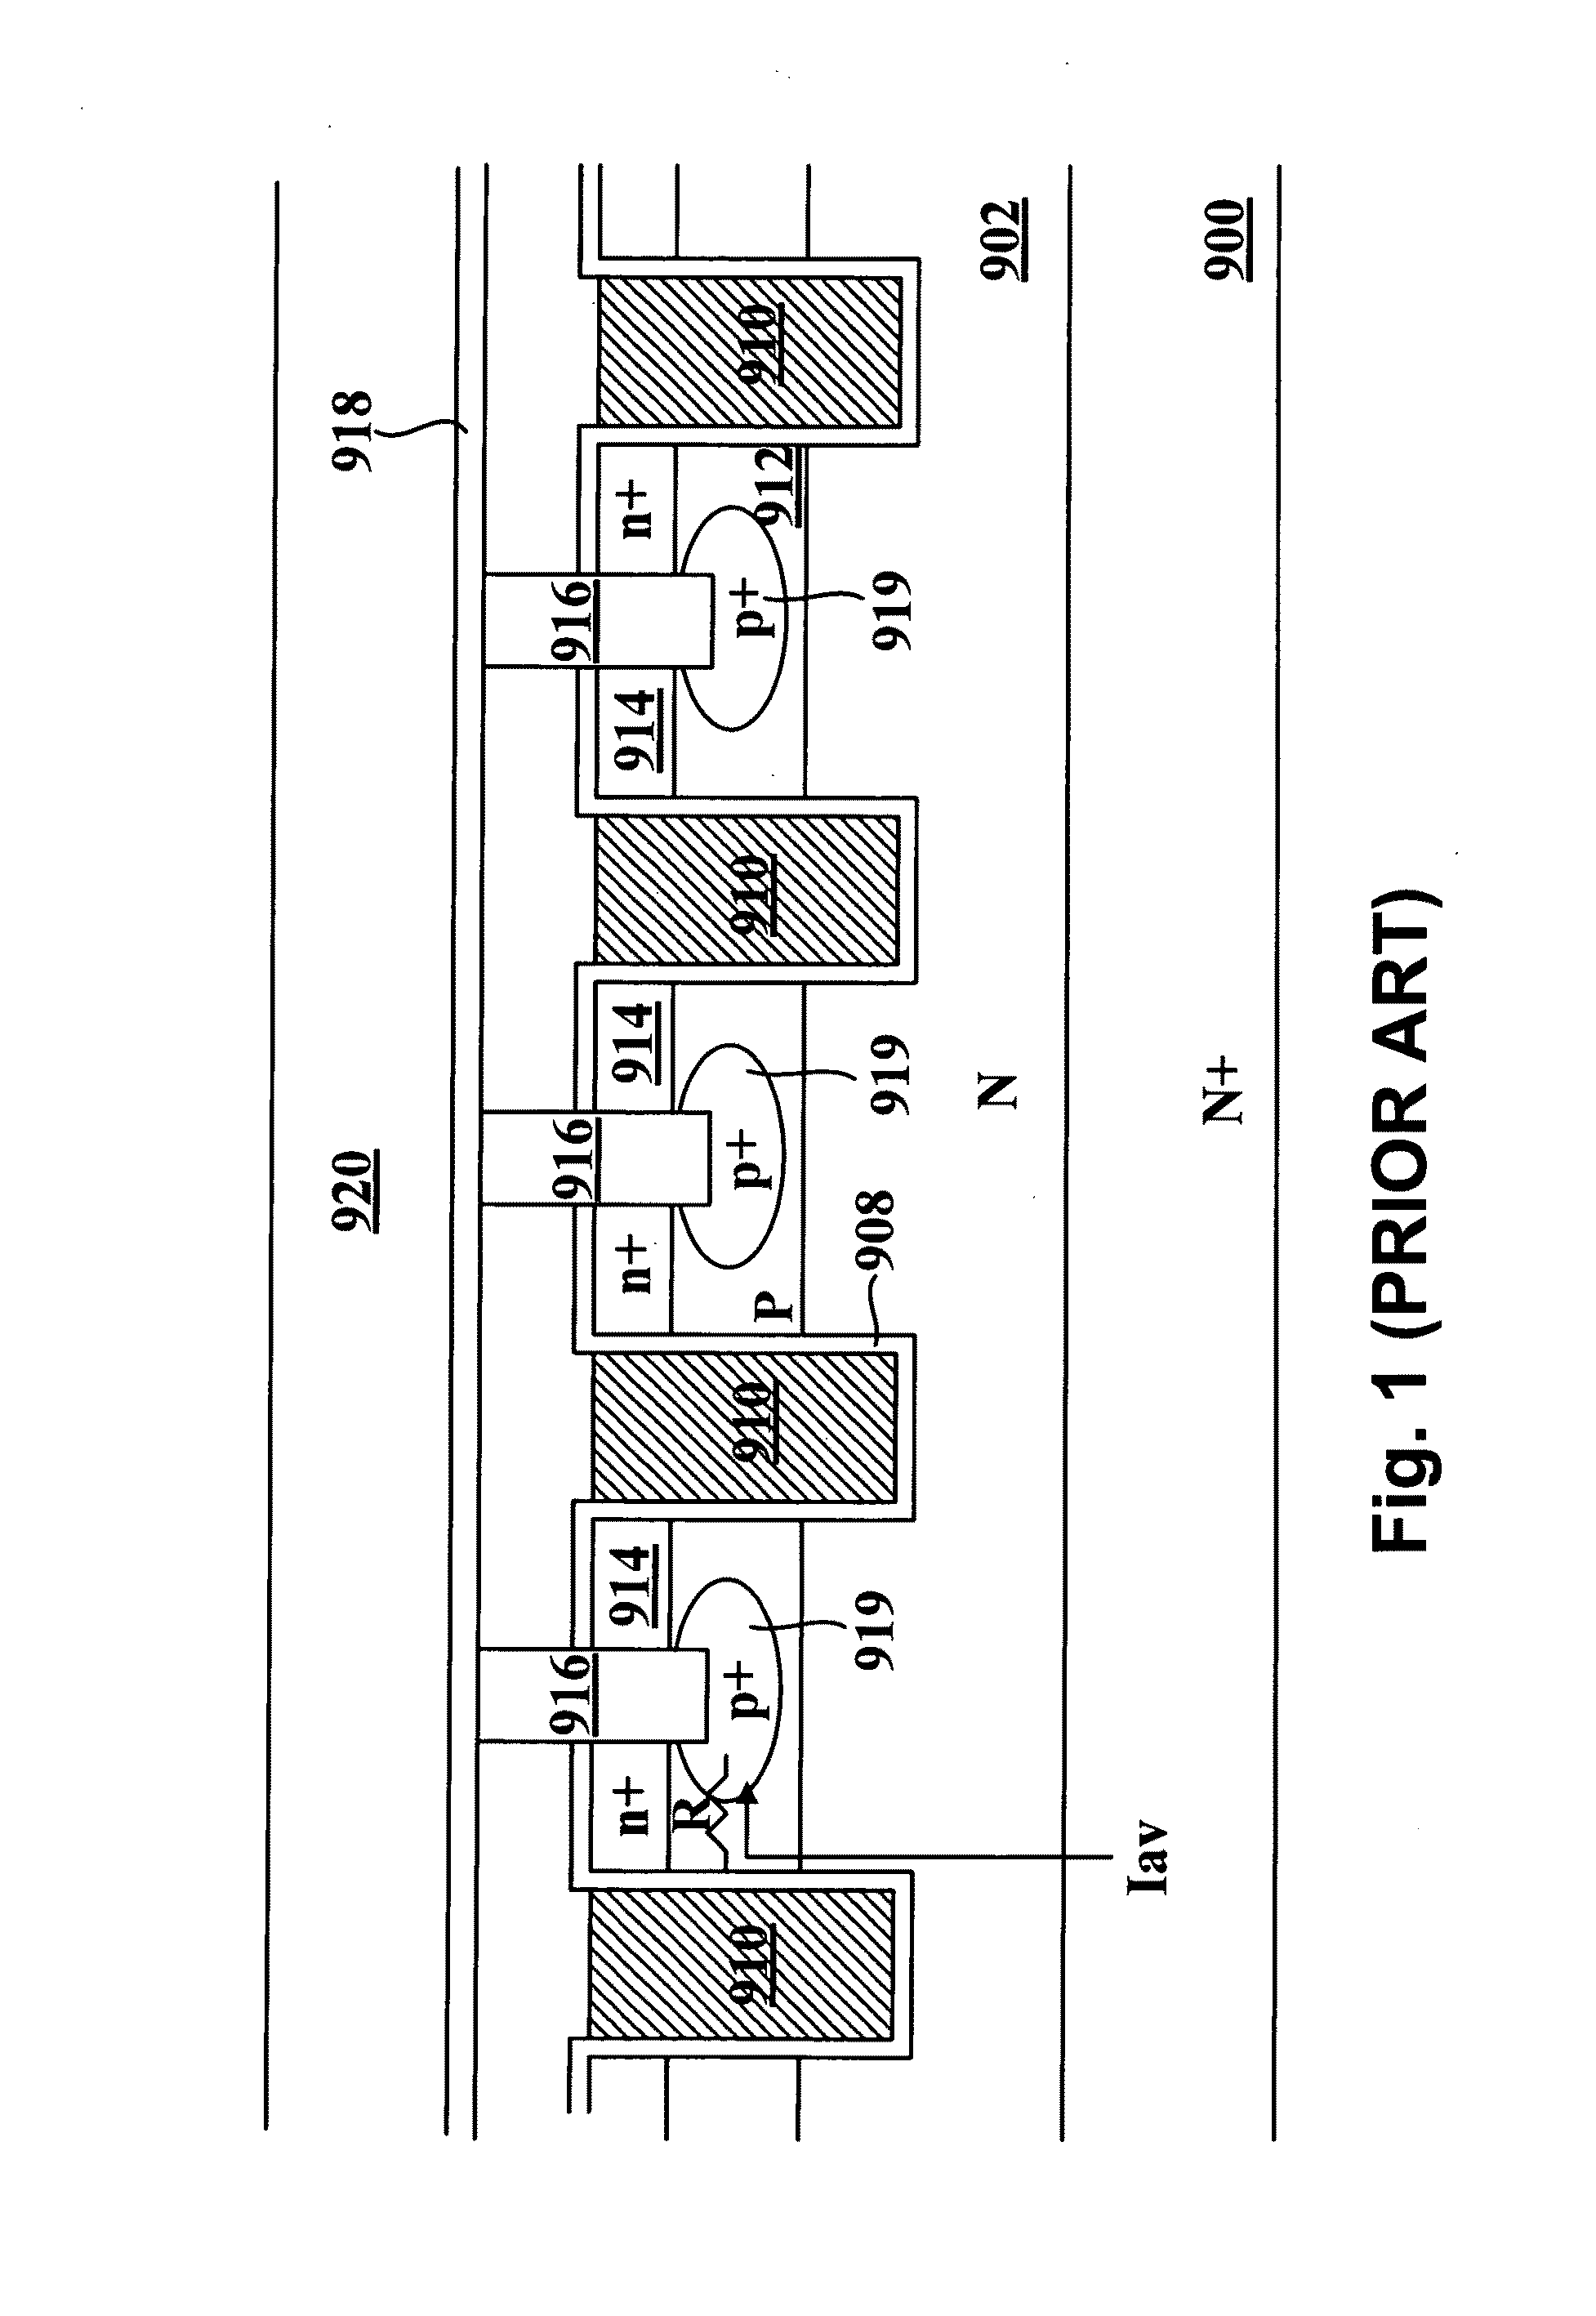 Trench MOSFET with terrace gate and self-aligned source trench contact